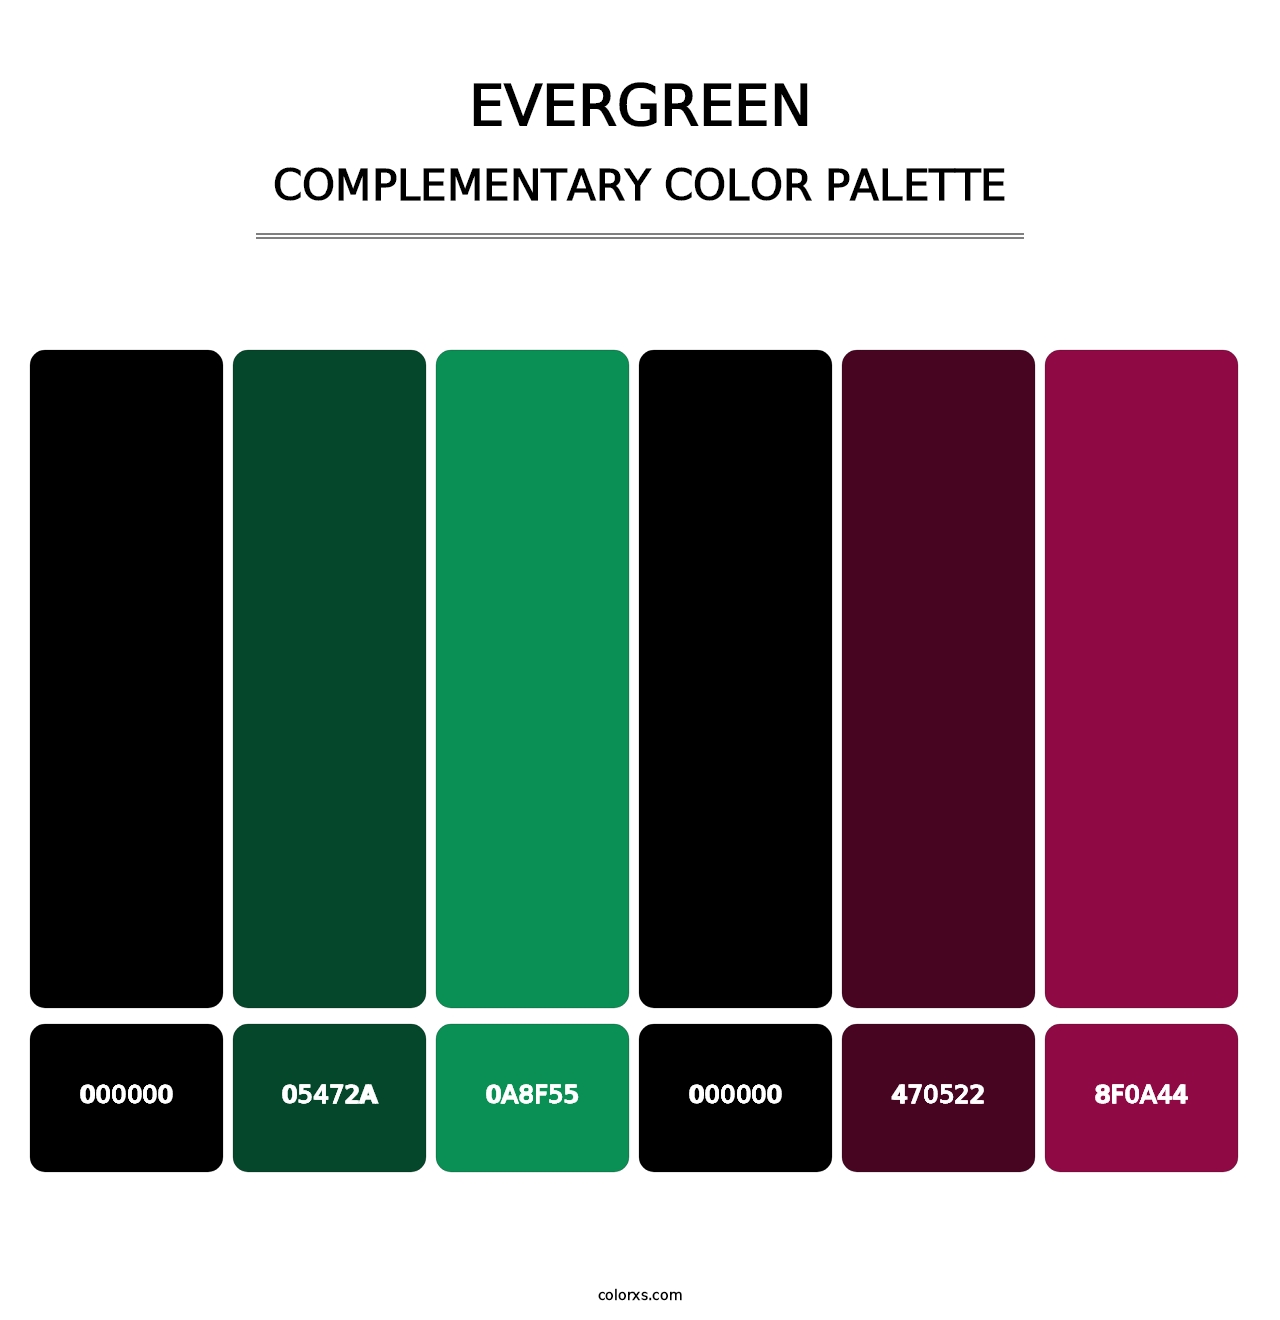 Evergreen - Complementary Color Palette